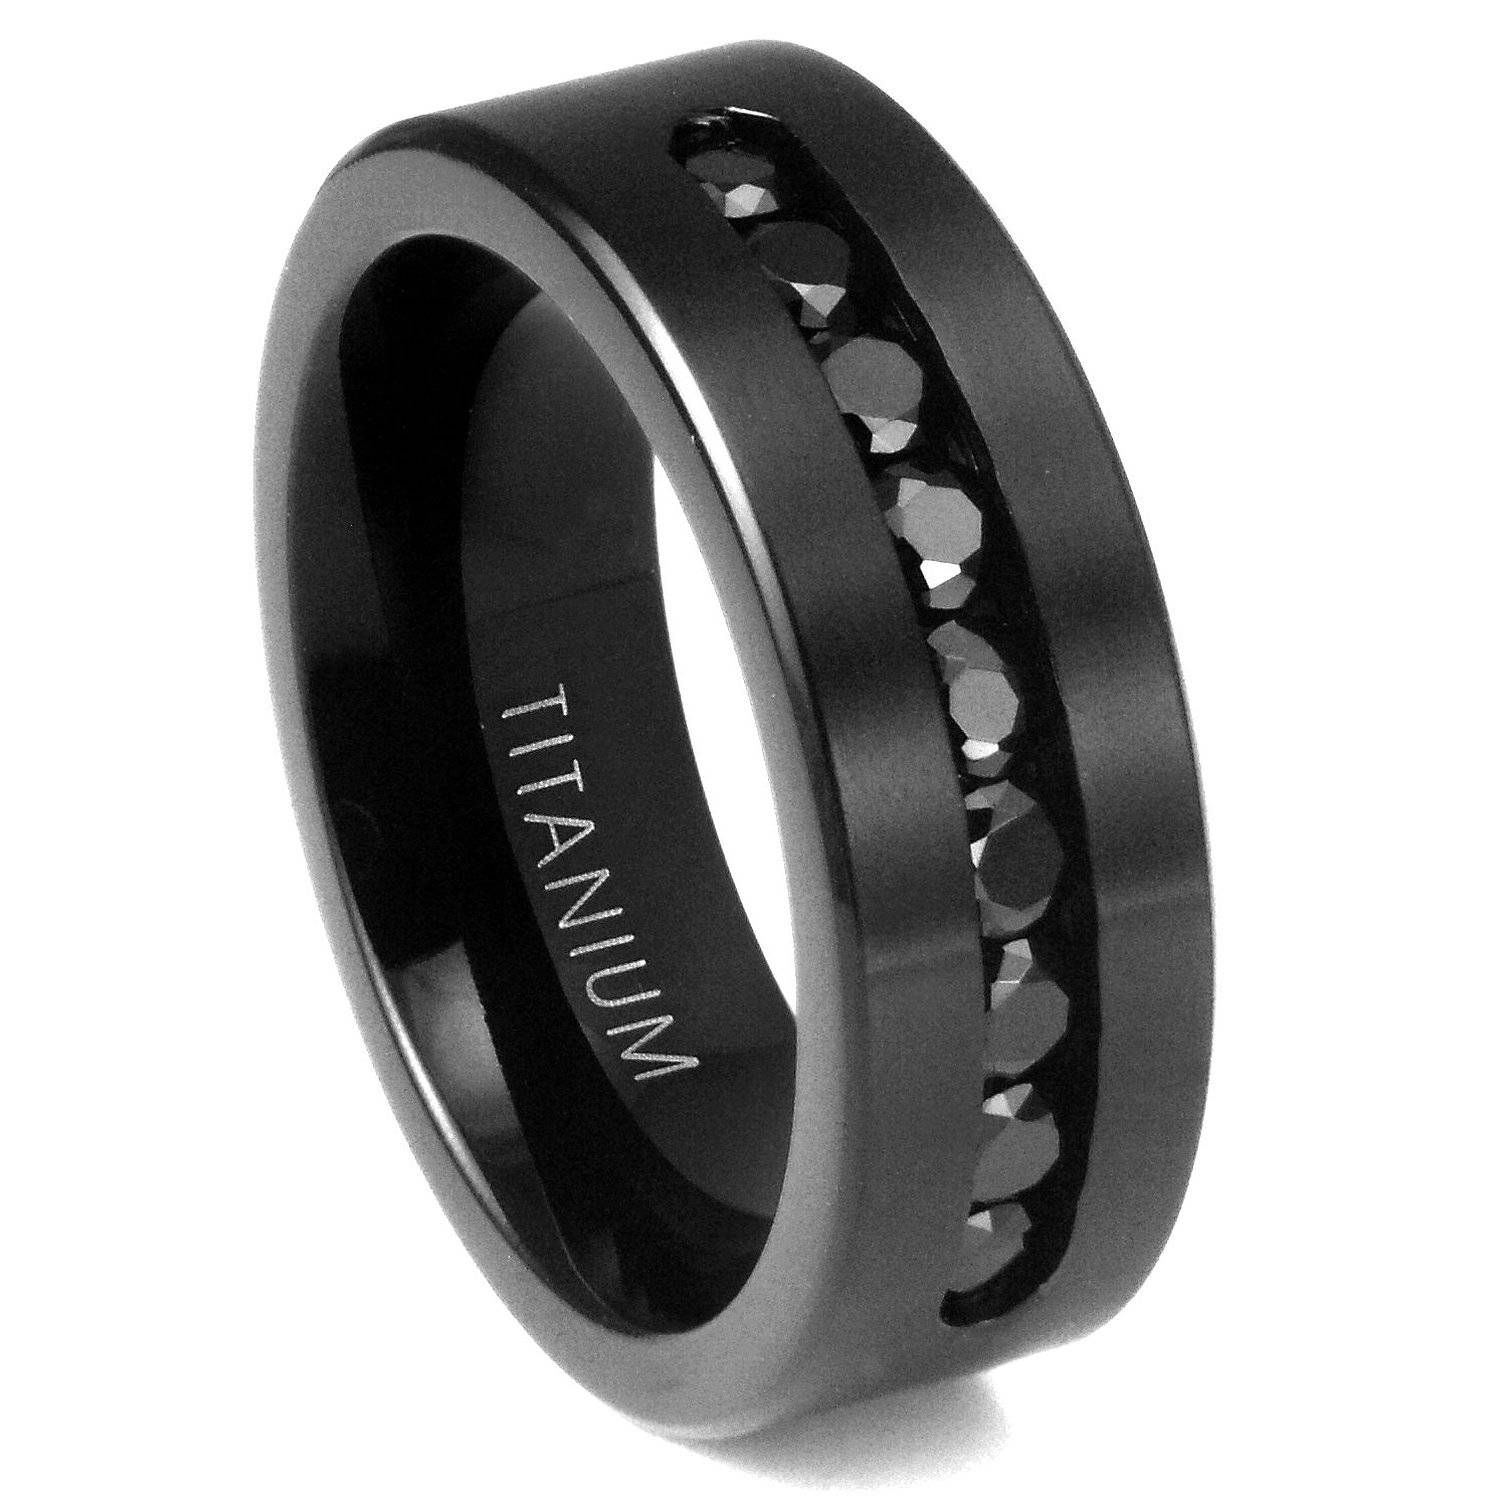 Tips On How To Choose Men Black Wedding Bands | Wedding Ideas With Regard To Black Wedding Bands With Black Diamonds (View 10 of 15)